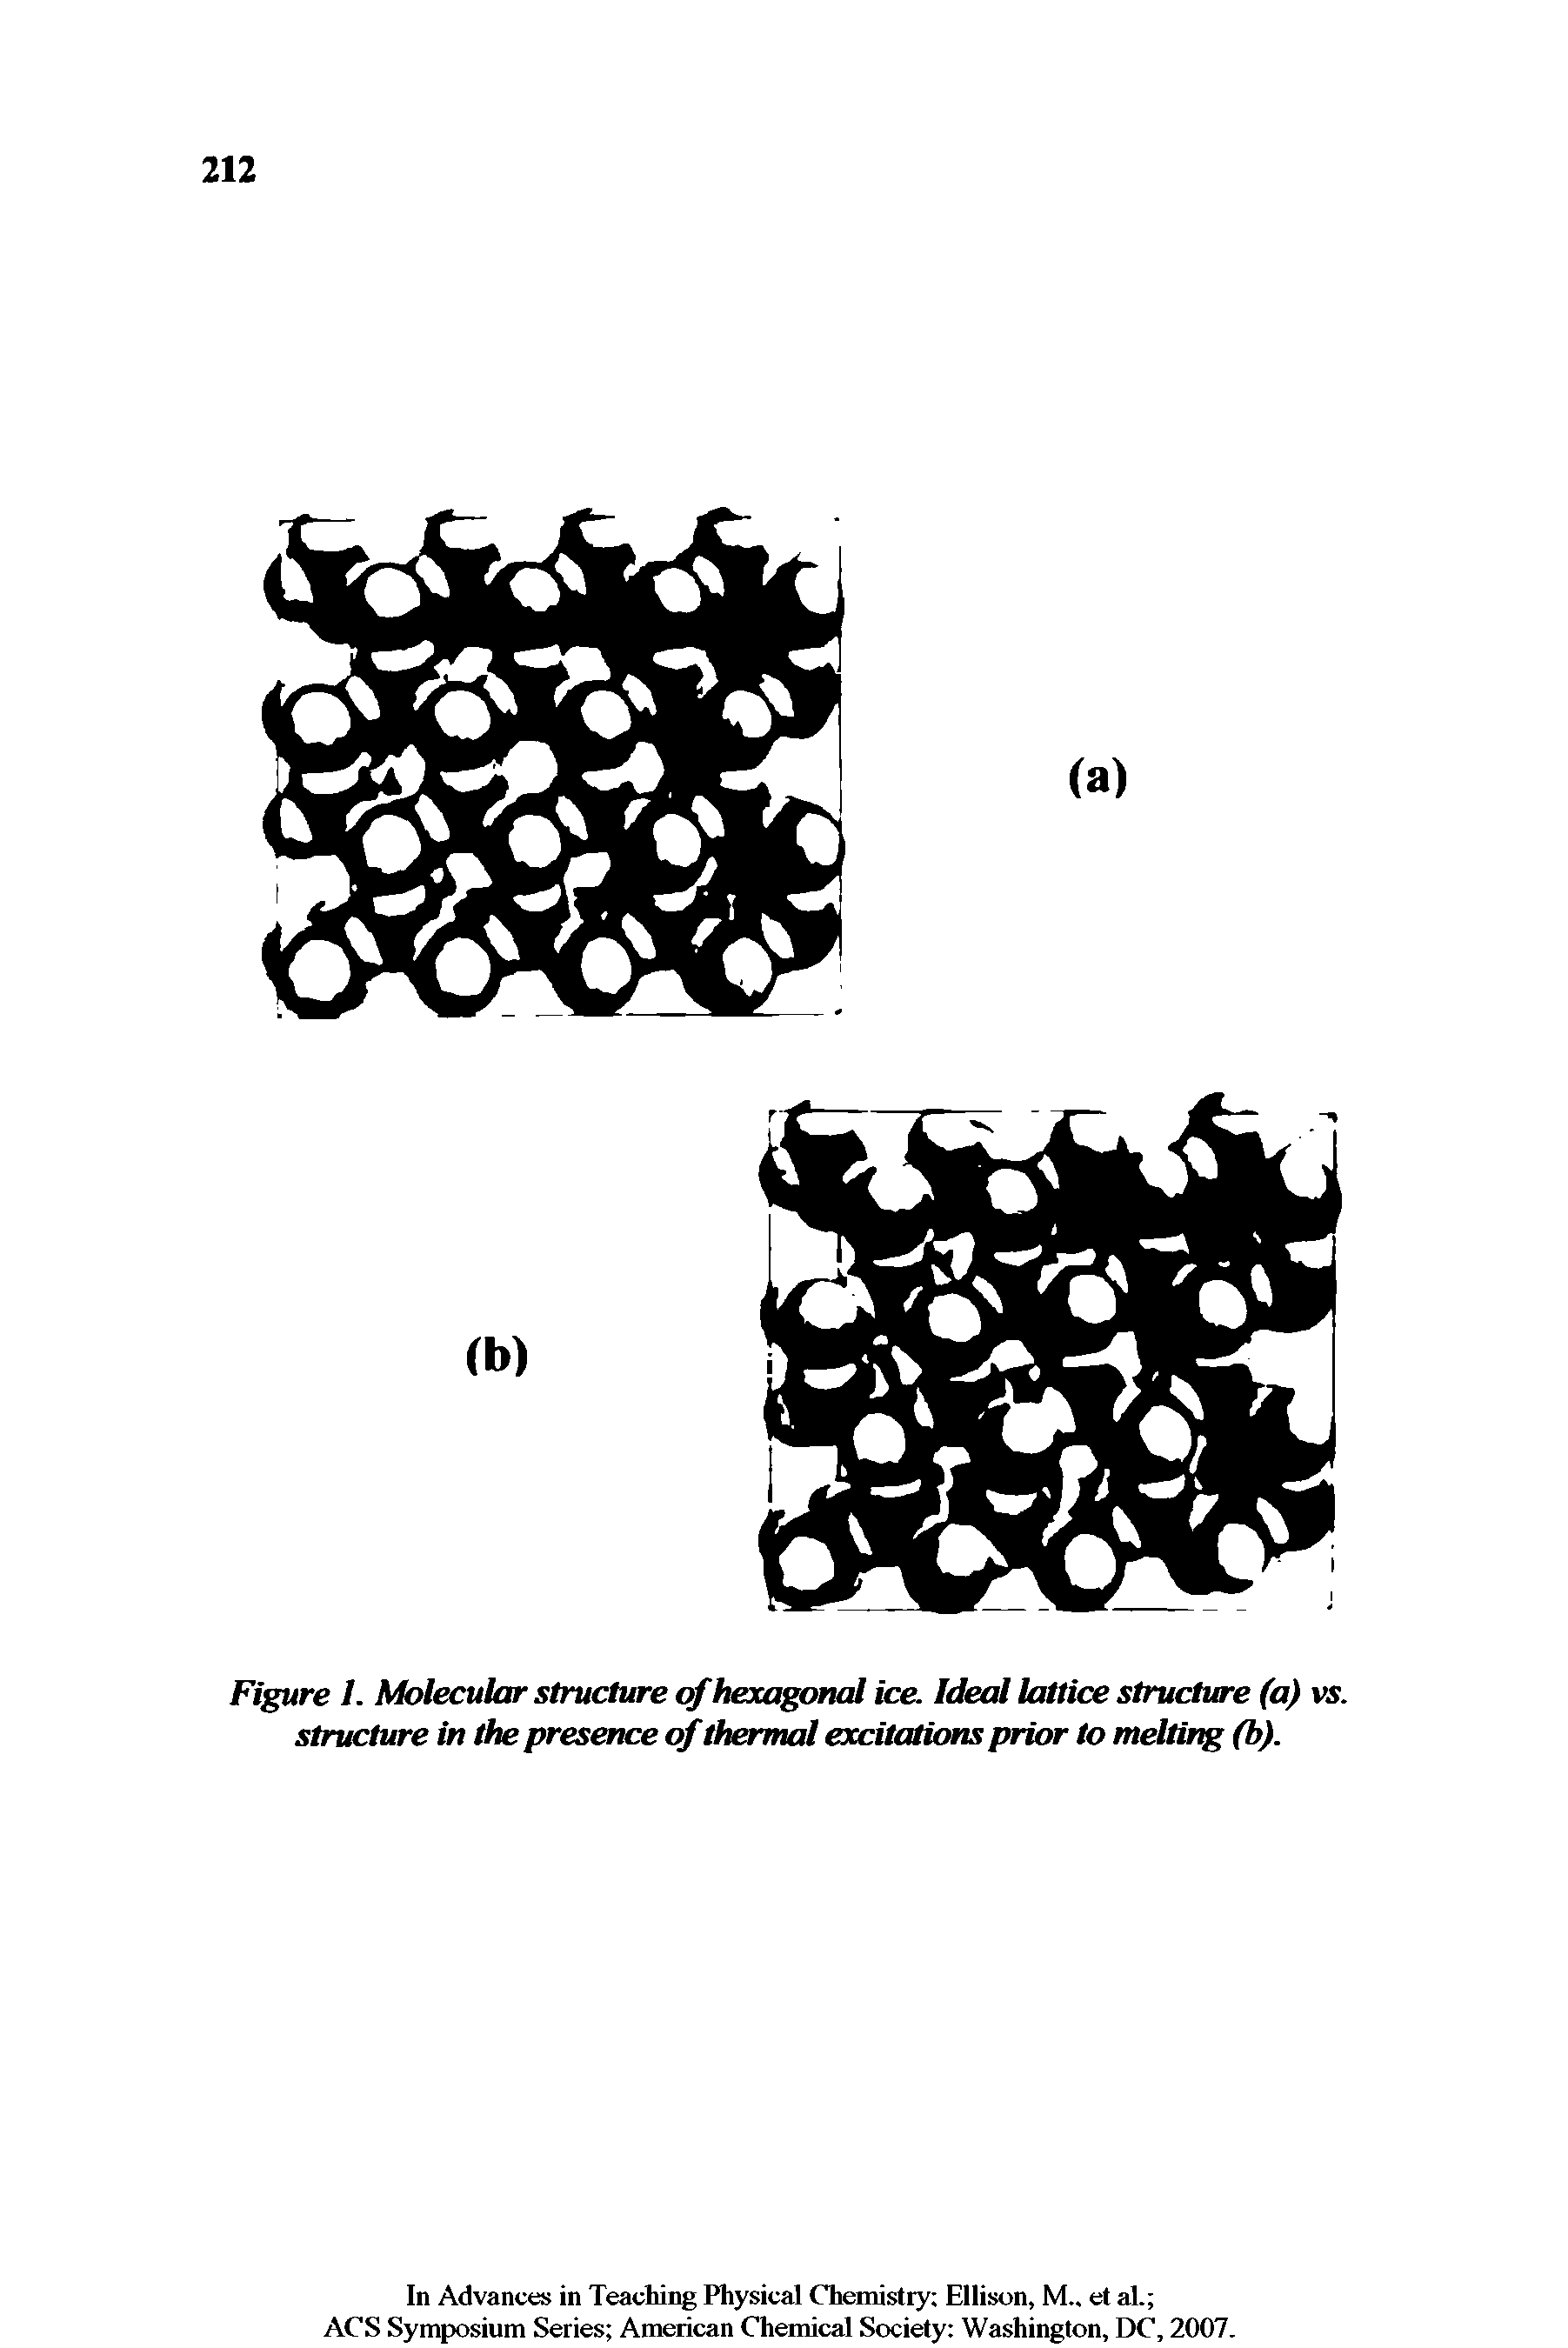 Figure 1. Molecular structure of hexagonal ice. Ideal lattice structure (a) vs. structure in the presence of thermal excitations prior to melting (b).